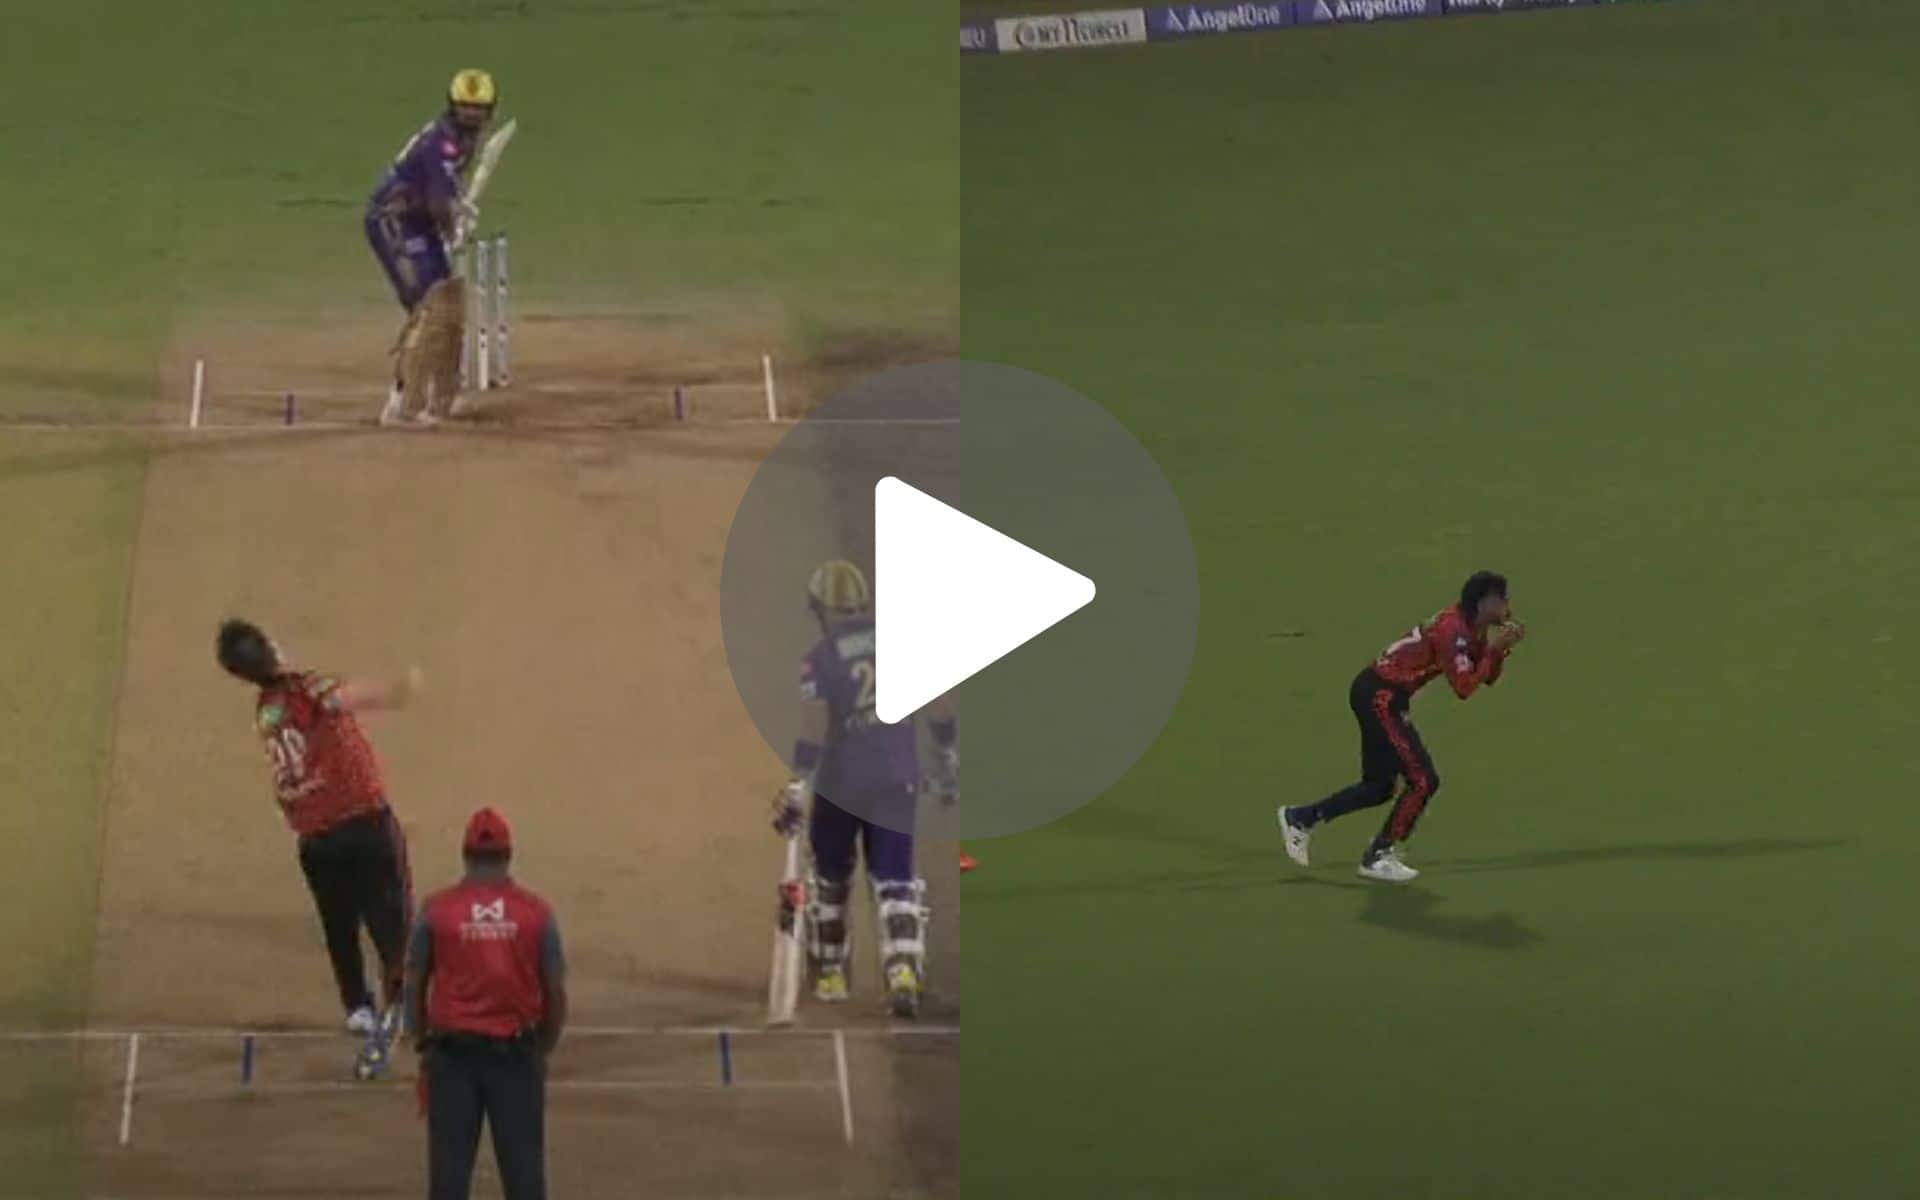 [Watch] Shahbaz Ahmed 'Kisses The Ball' To Switch SRH's Luck As Cummins Takes 'Sweet' Revenge Vs Narine